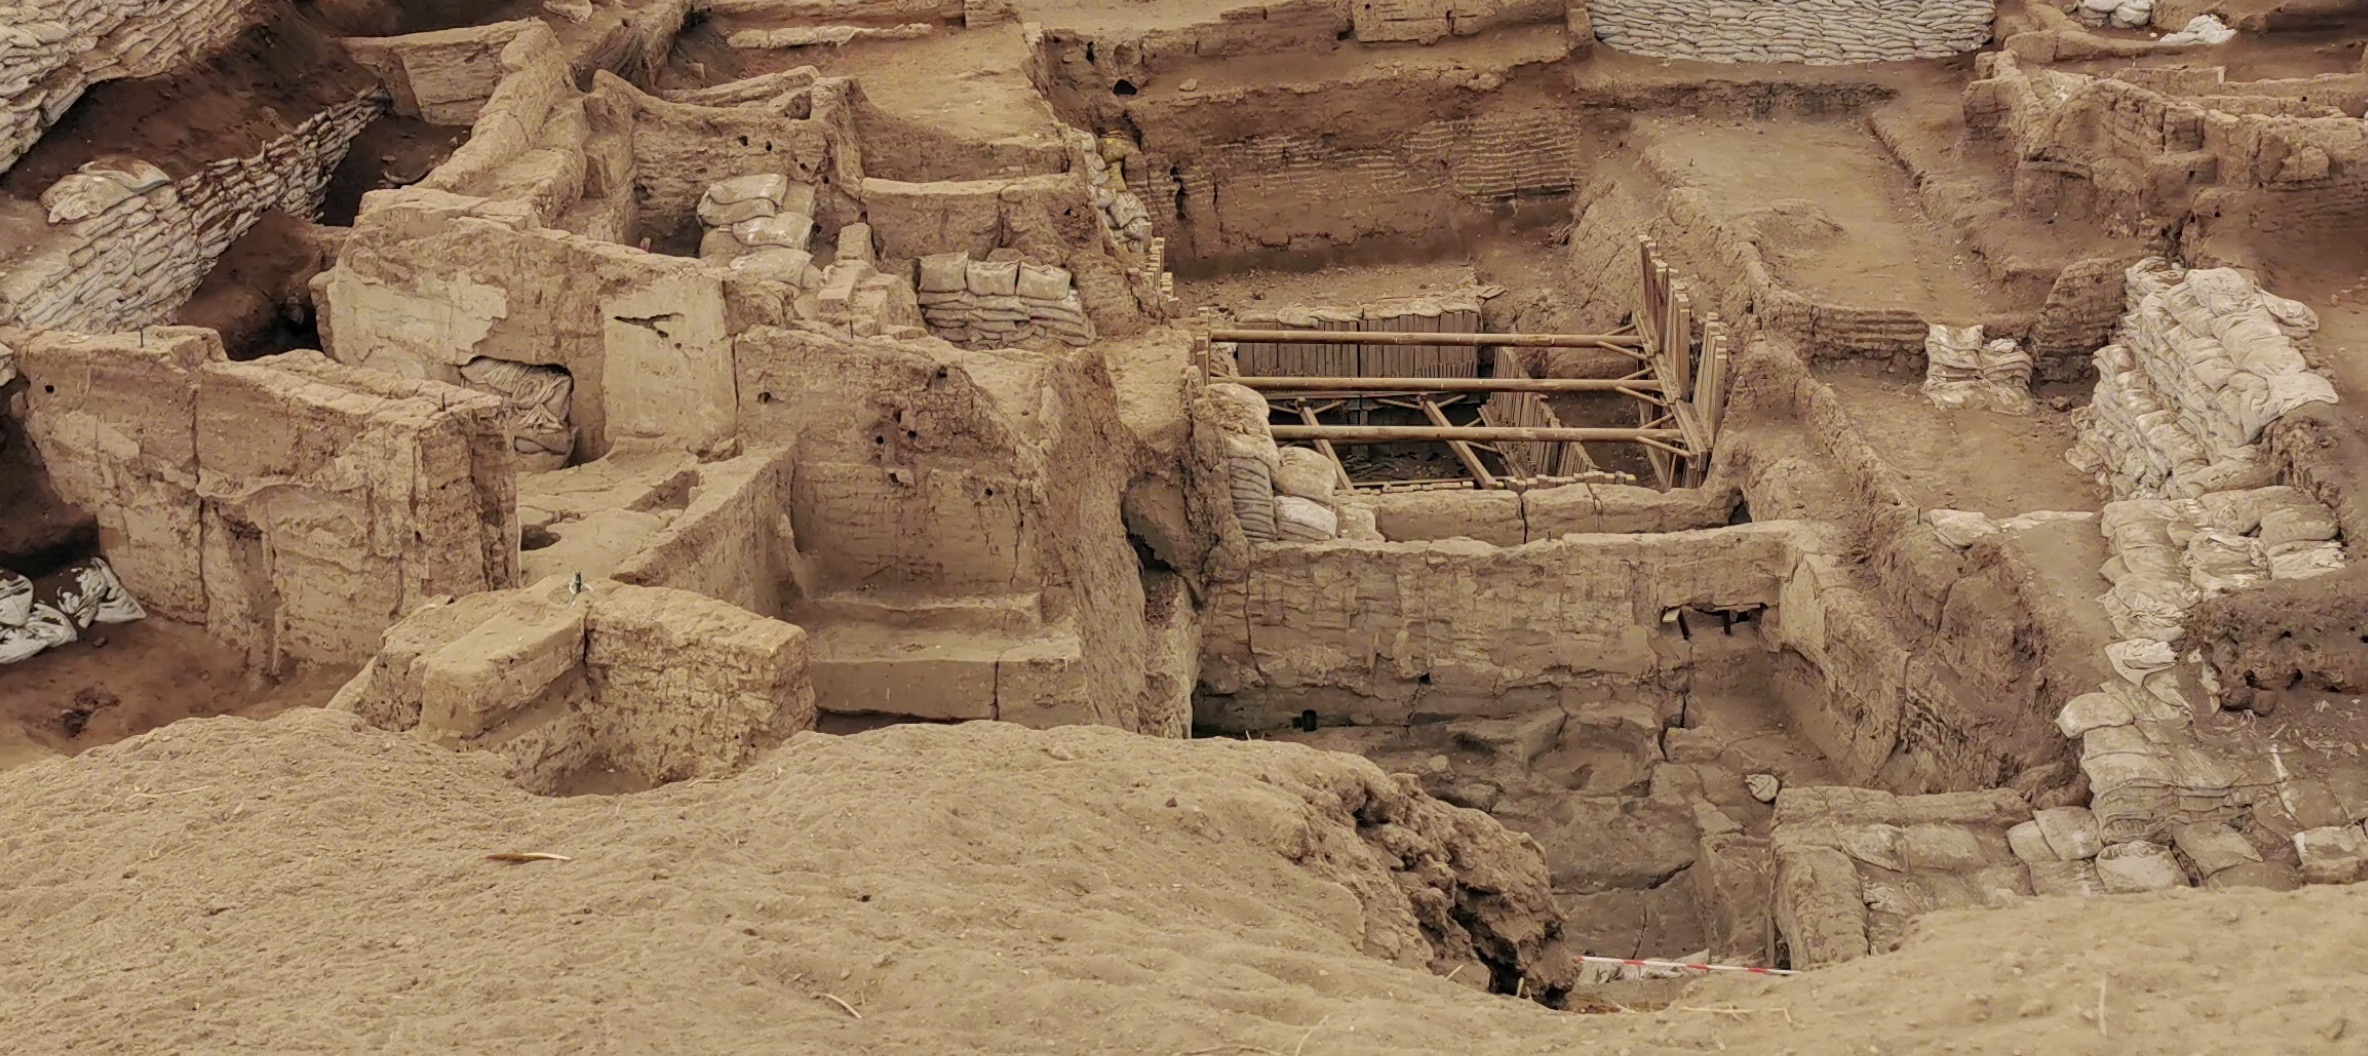 A photograph showing the remnants of Catalhoyuk.